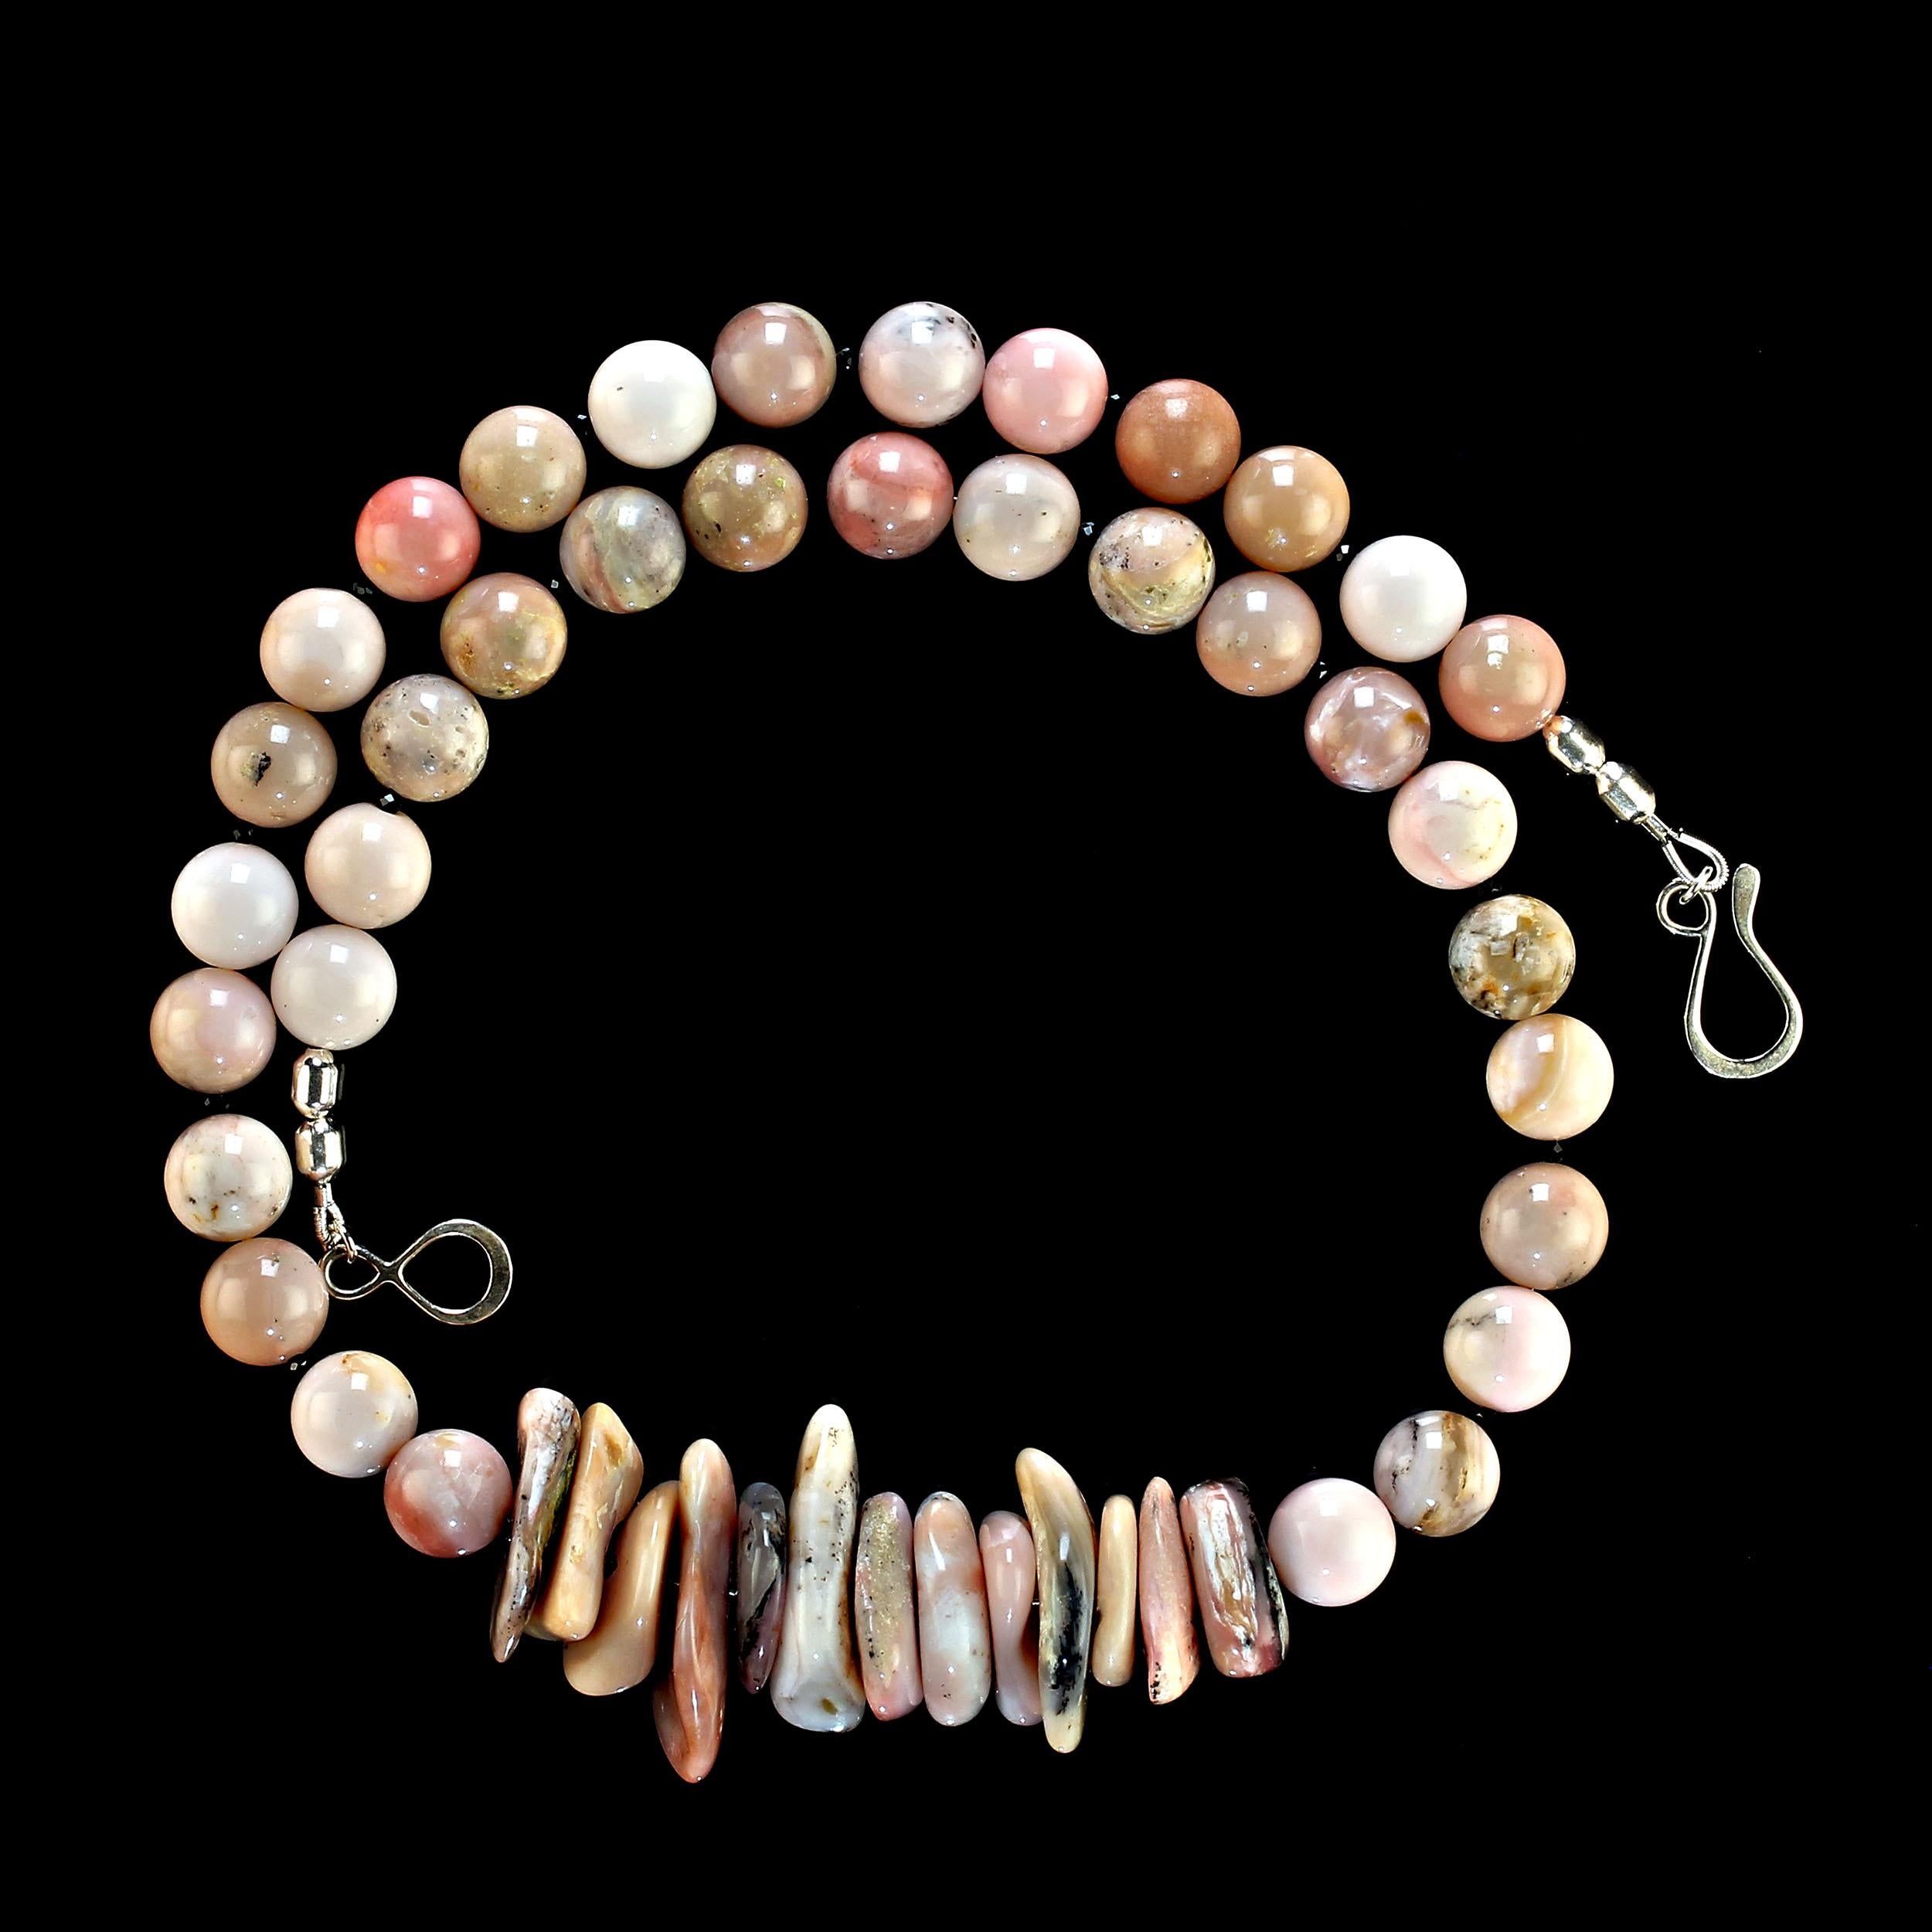 20 Inch Pink Peruvian Opal necklace that is perfect for fall and winter.  It is the perfect accent all your fall and winter browns, grays, burgundies, and blacks.  This easy to wear necklace features a sterling silver hook and eye clasp.  MN2347